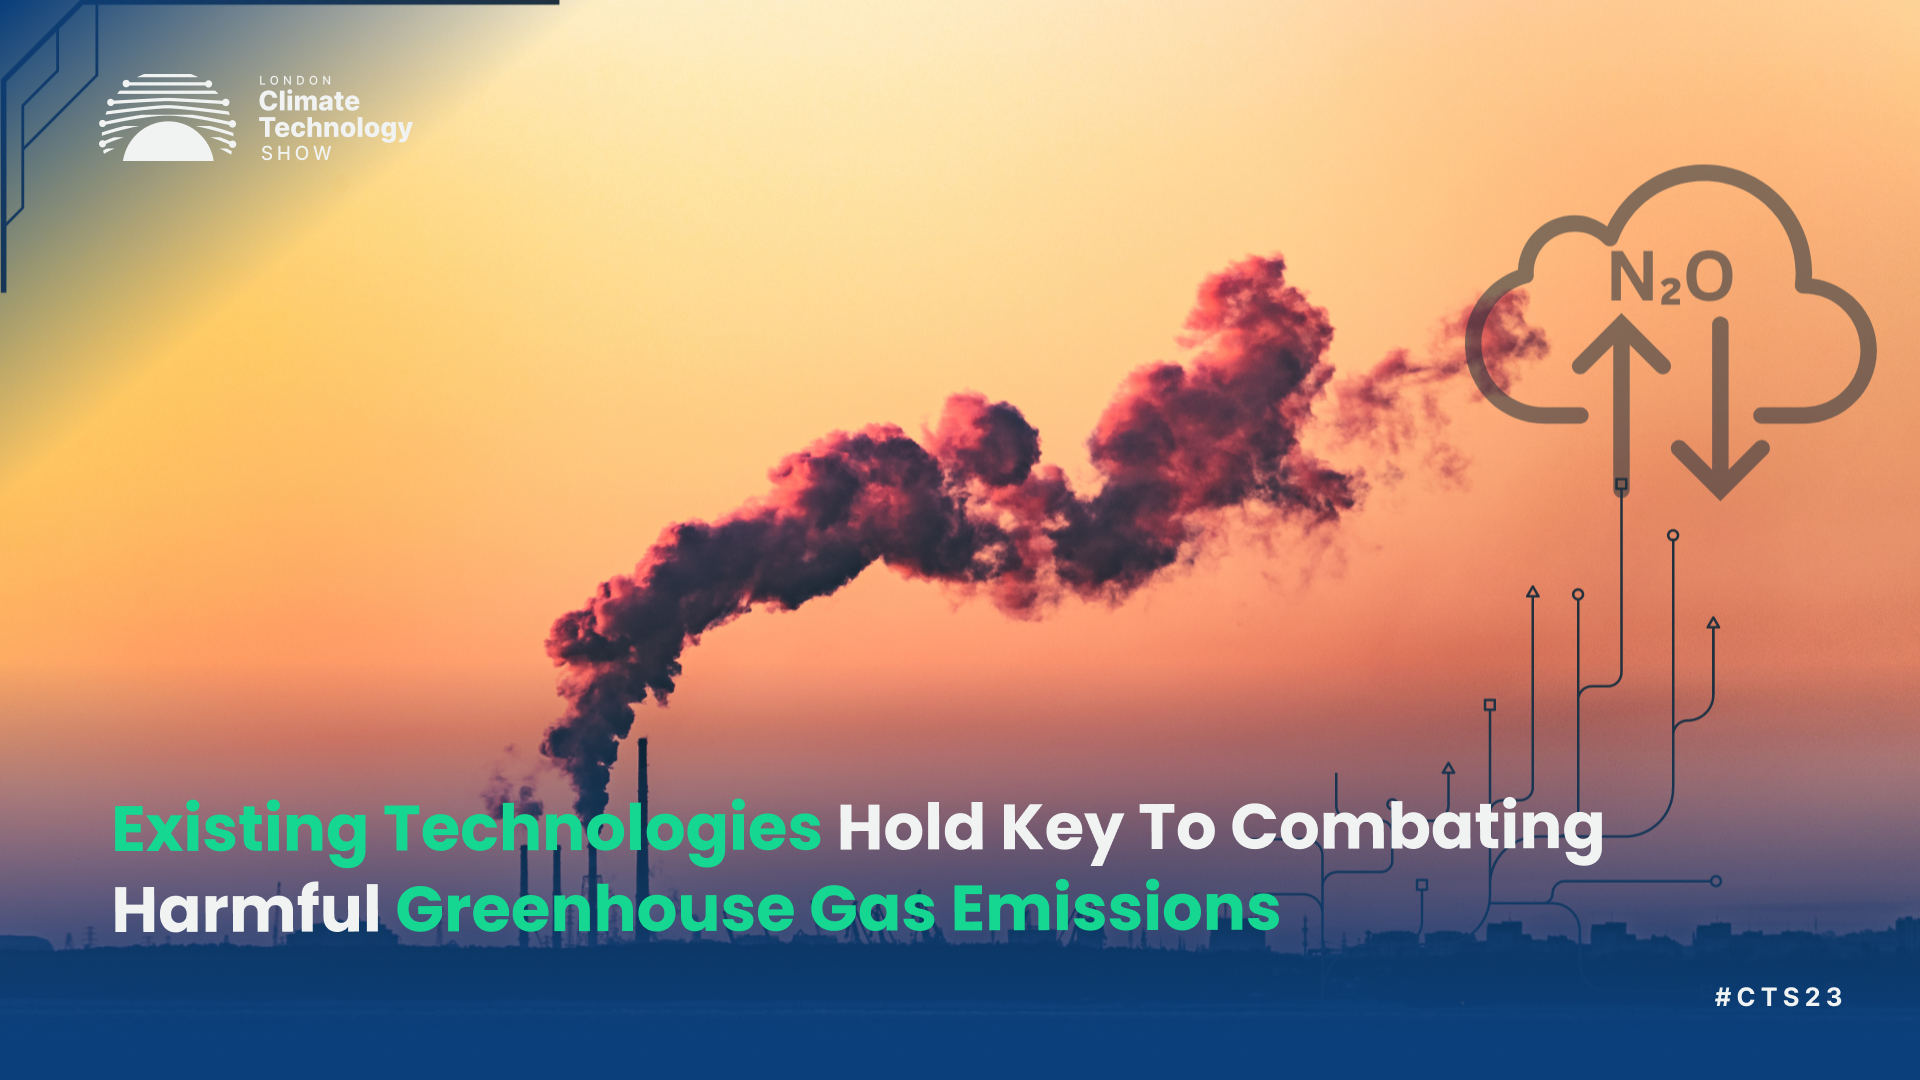 Existing Technologies Hold Key To Combating Harmful Greenhouse Gas Emissions